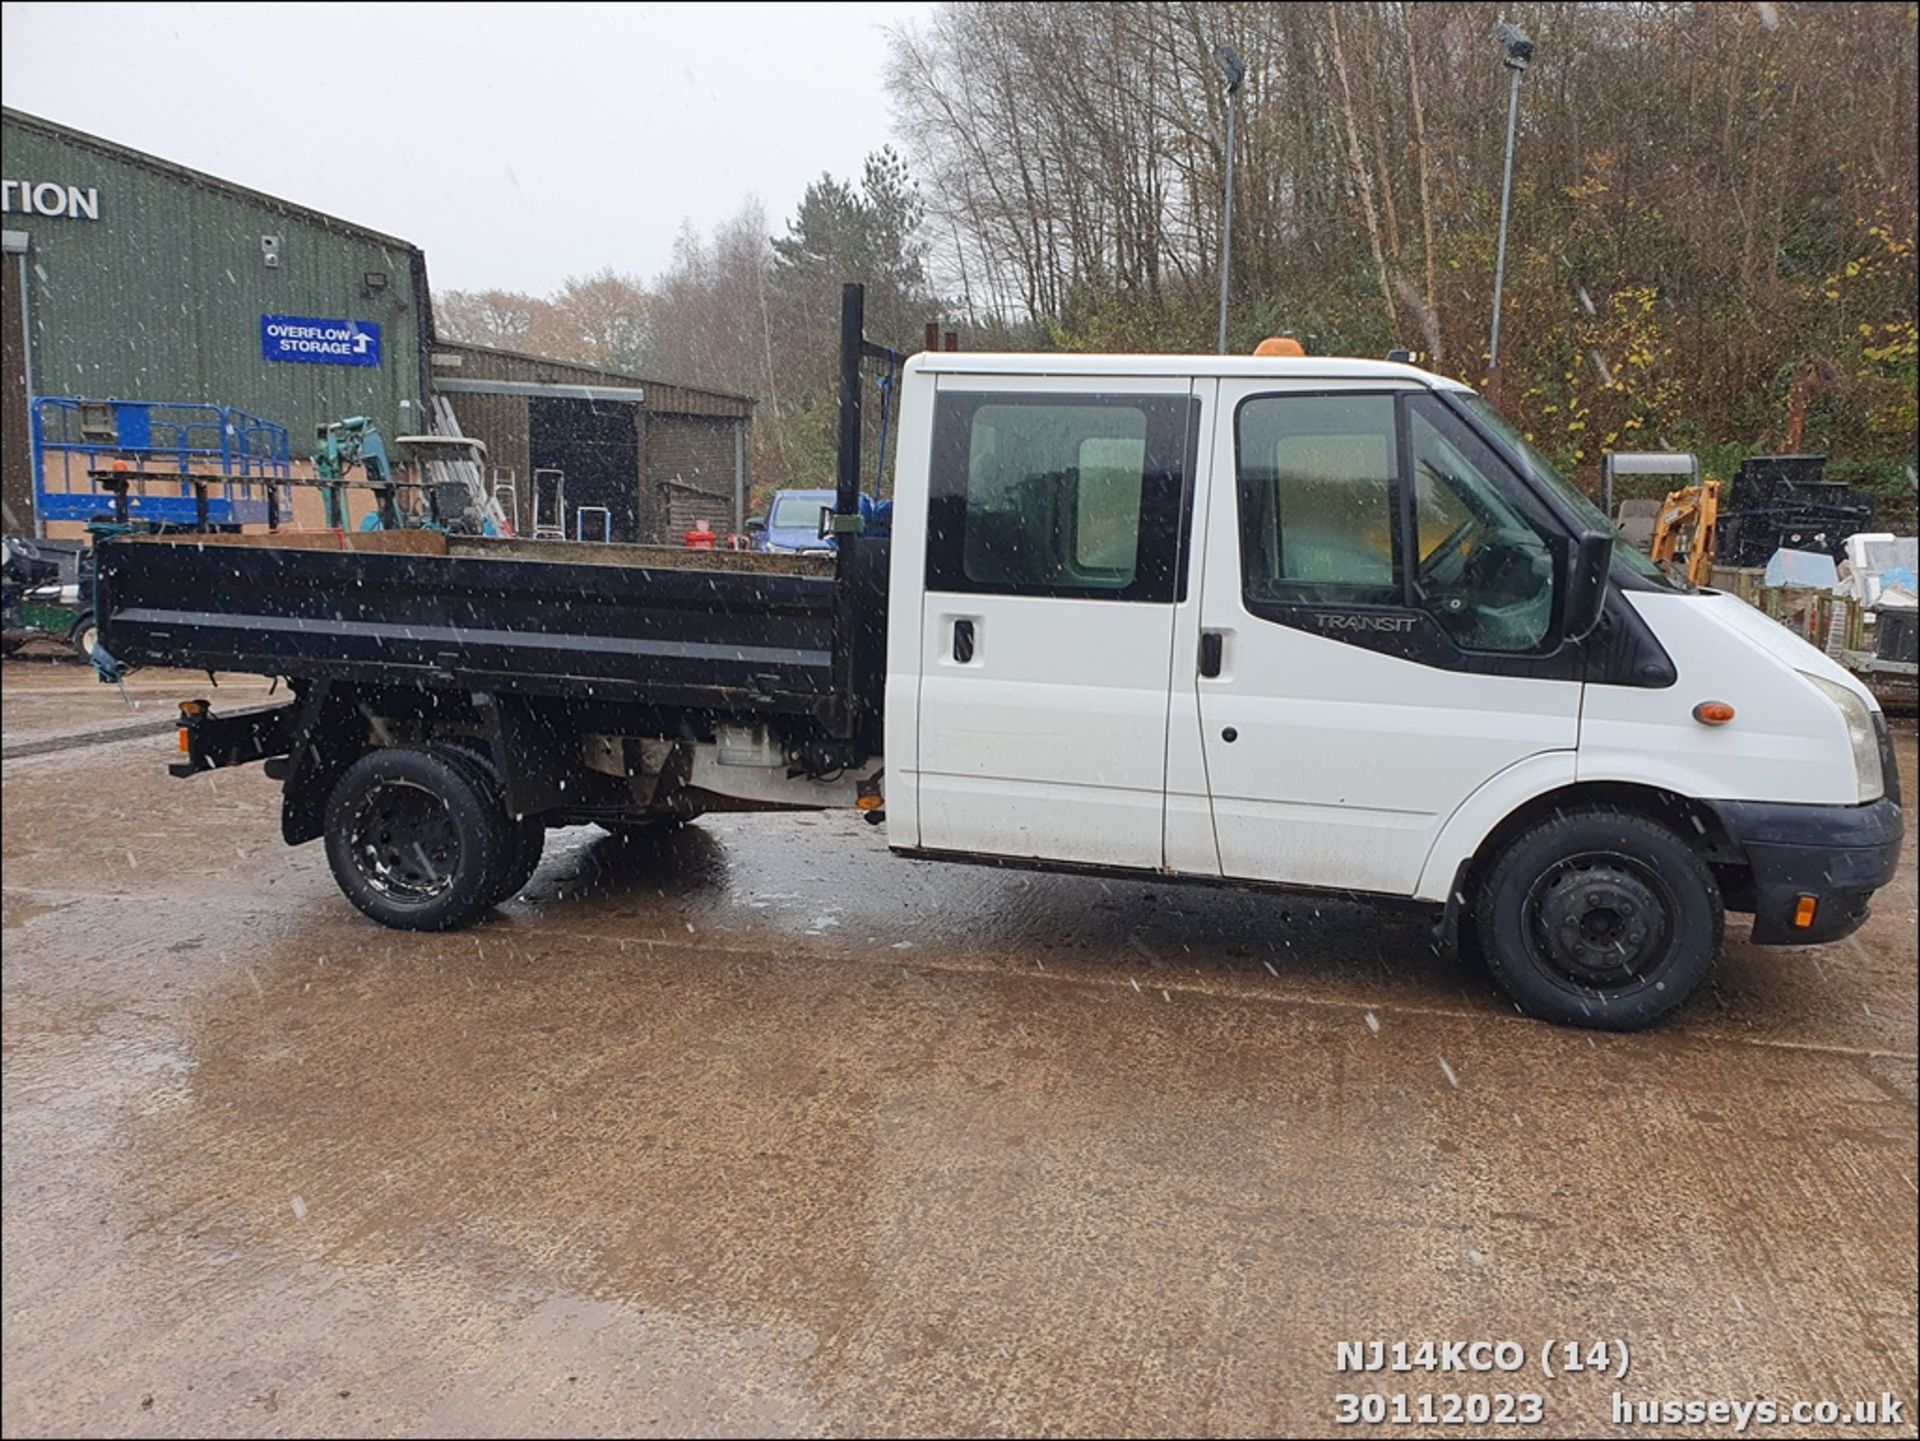 14/14 FORD TRANSIT 100 T350 RWD - 2198cc 4dr Tipper (White, 75k) - Image 15 of 51